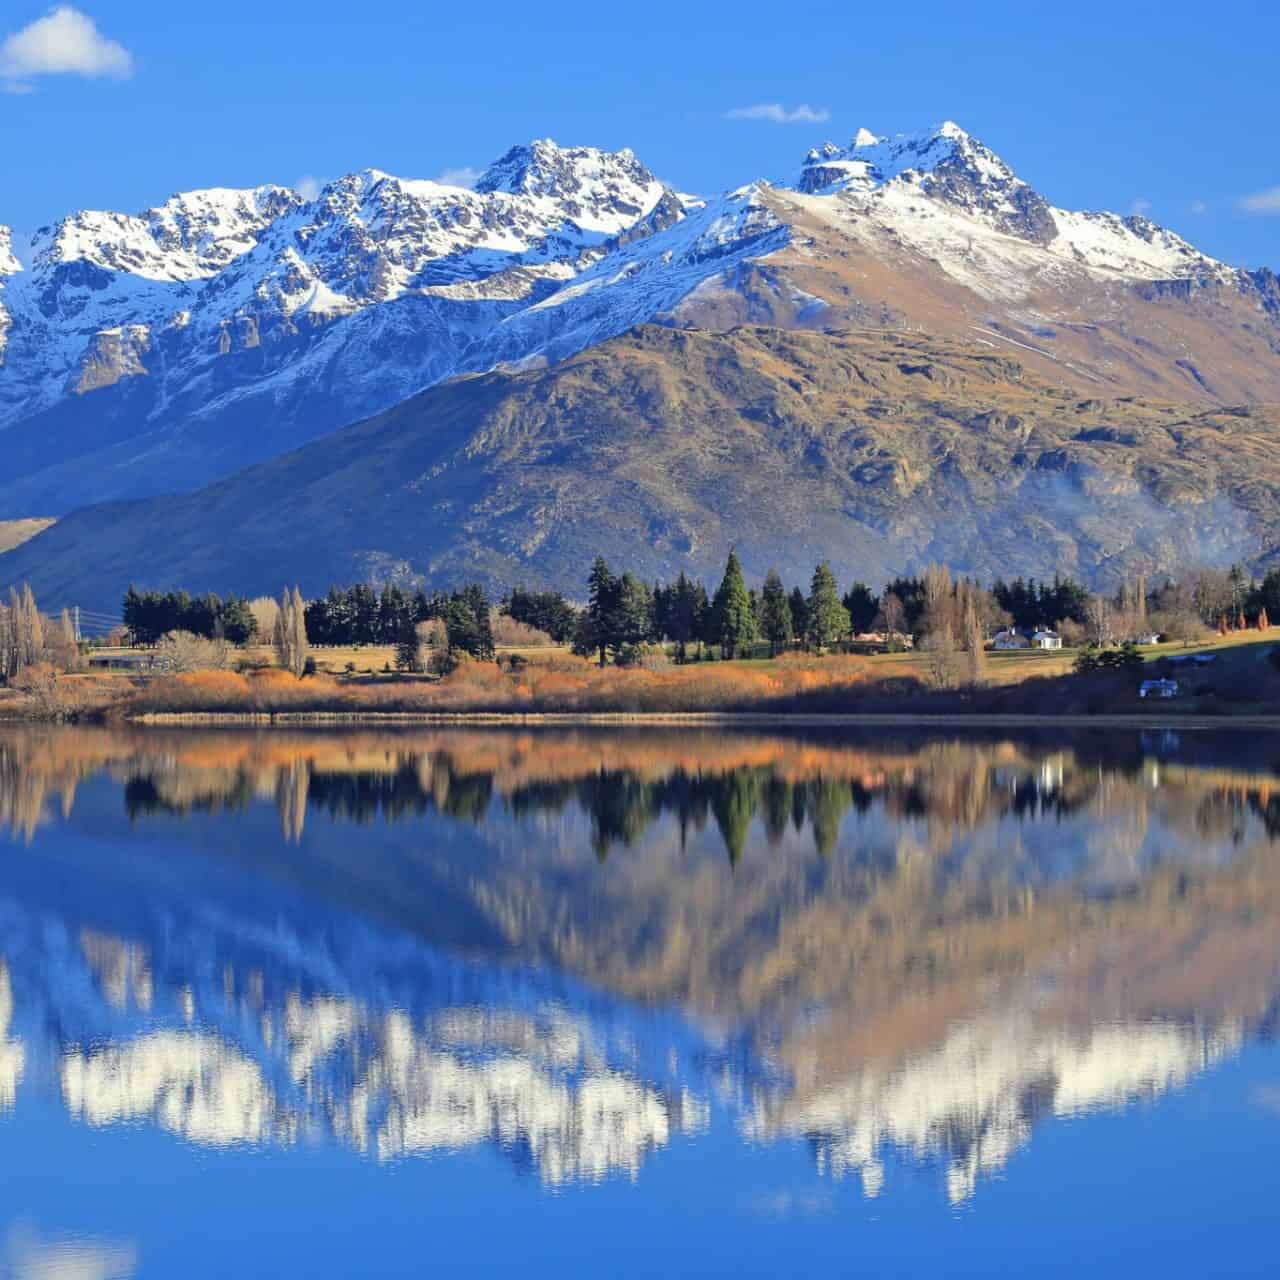 Queenstown New Zealand Fly-Drive-Stay